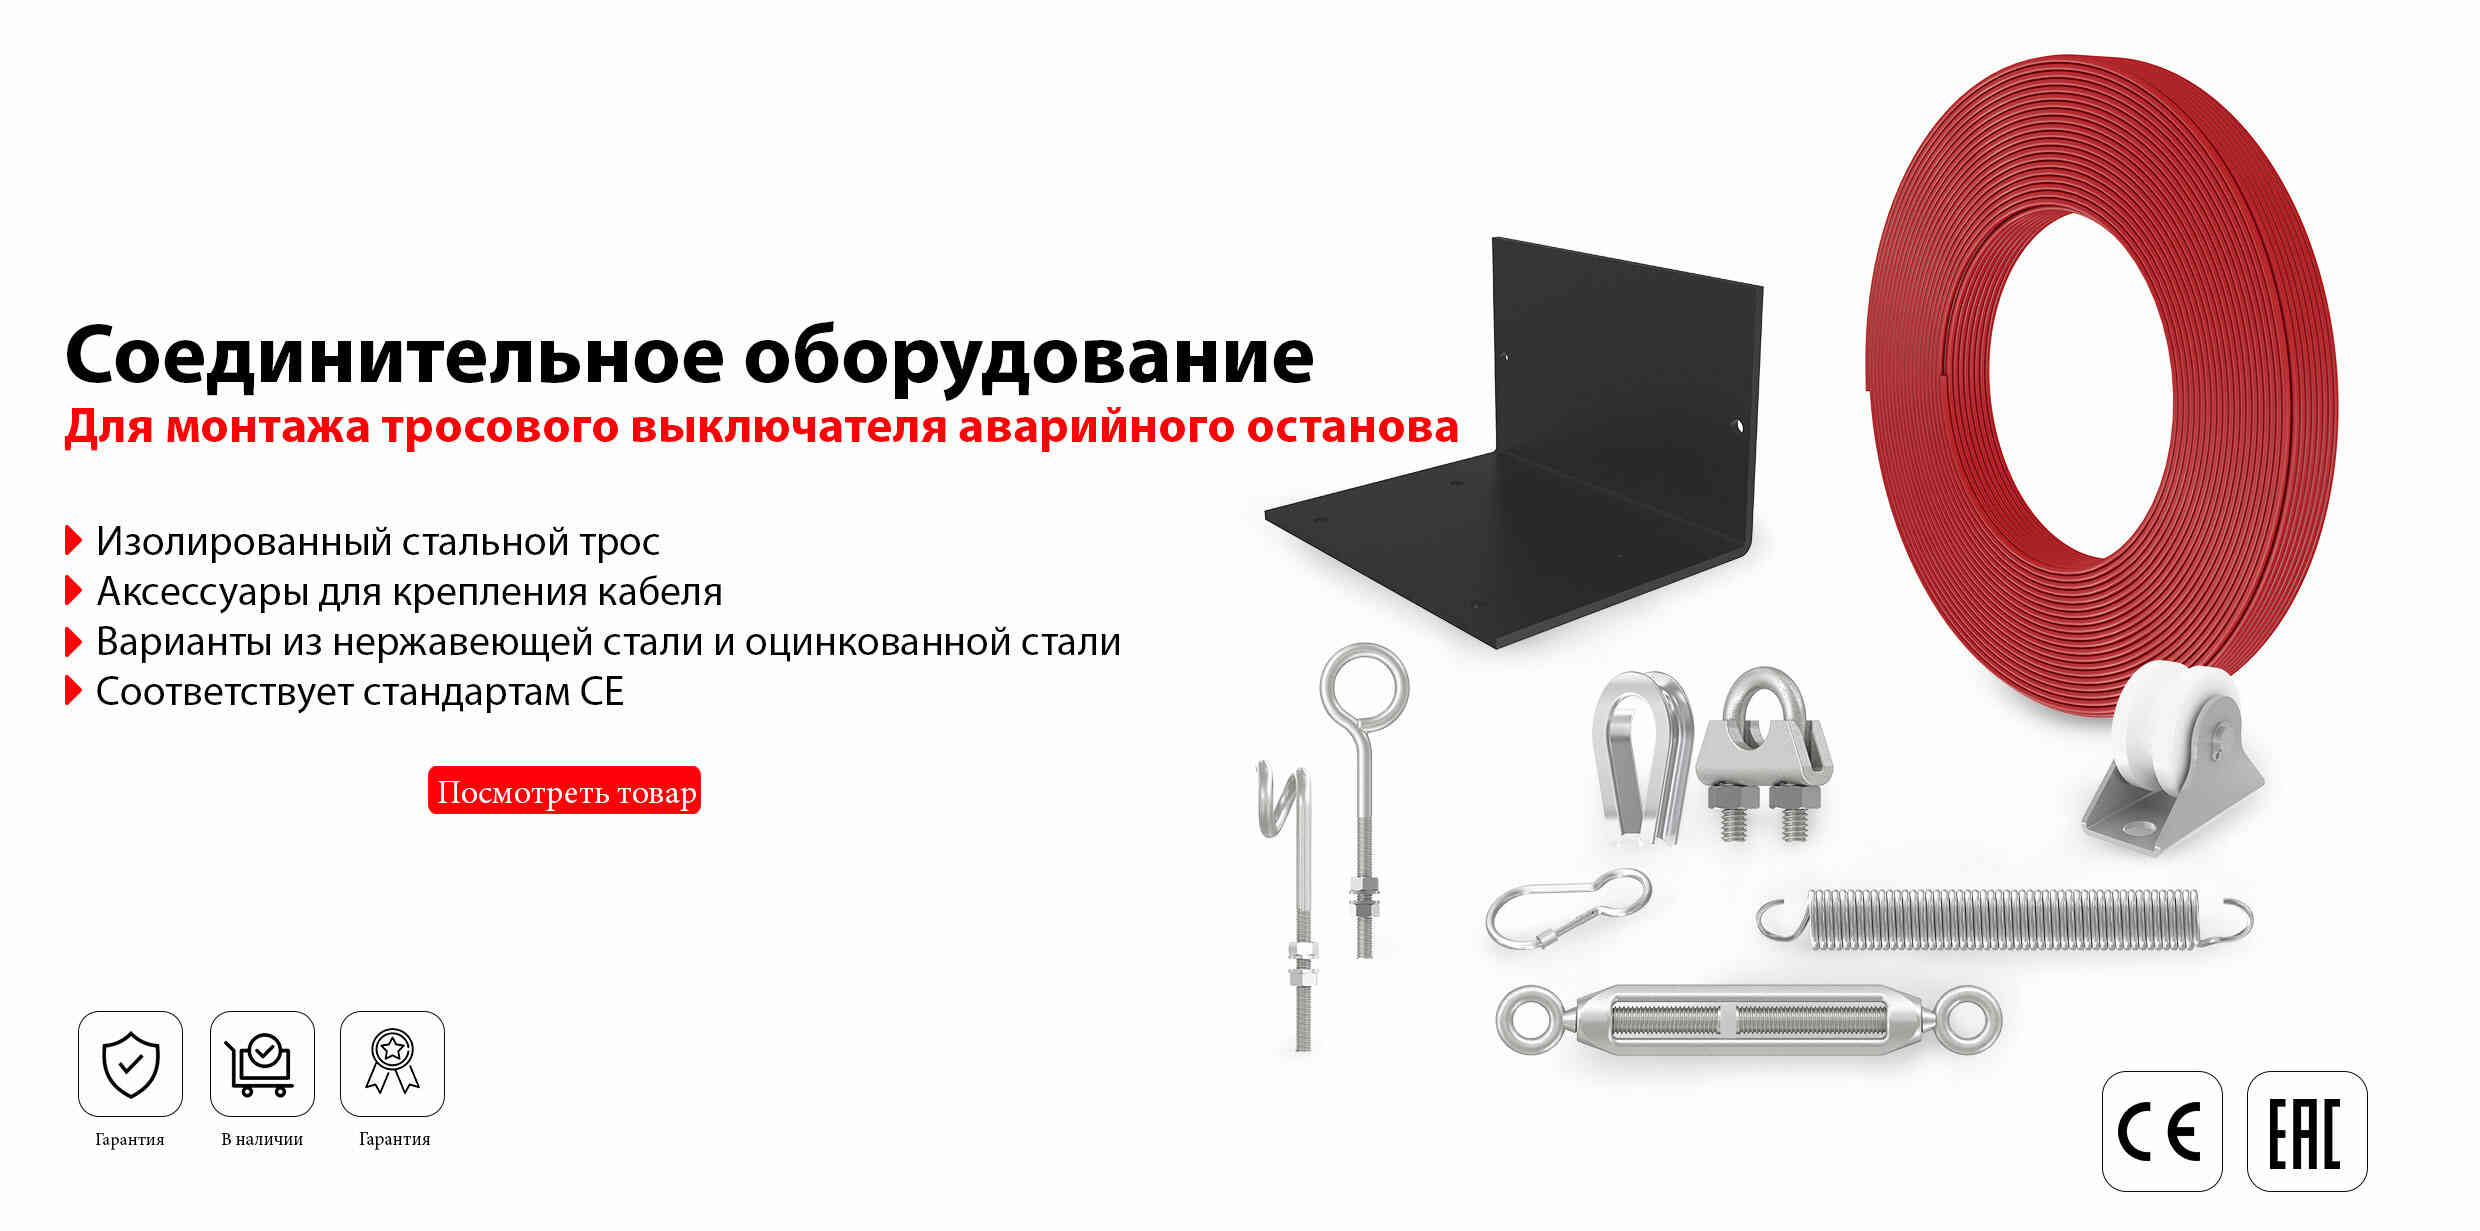 for-pull-cord-emergency-switch-installation-rus